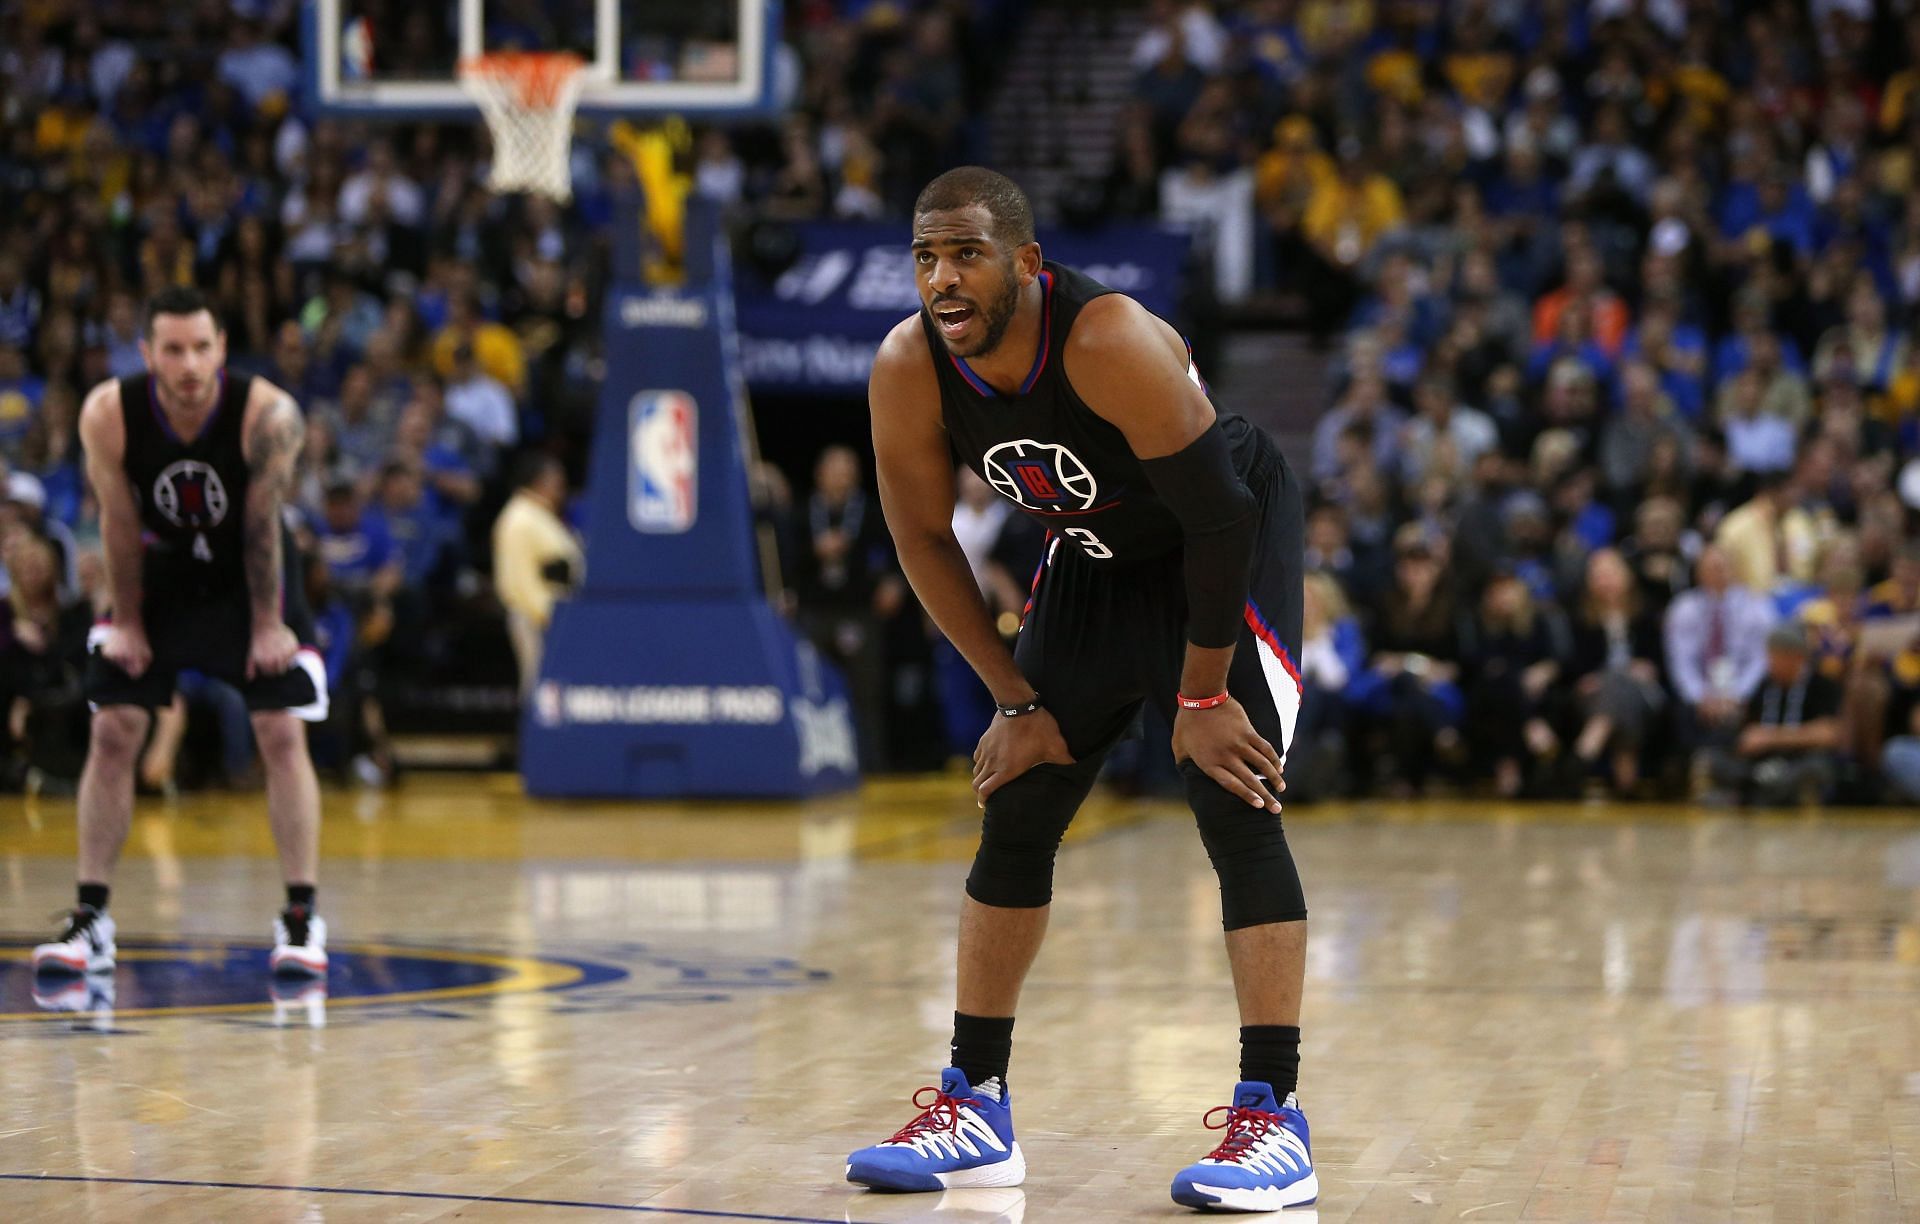 The Art of the Assist: LA Clippers All-Star Chris Paul